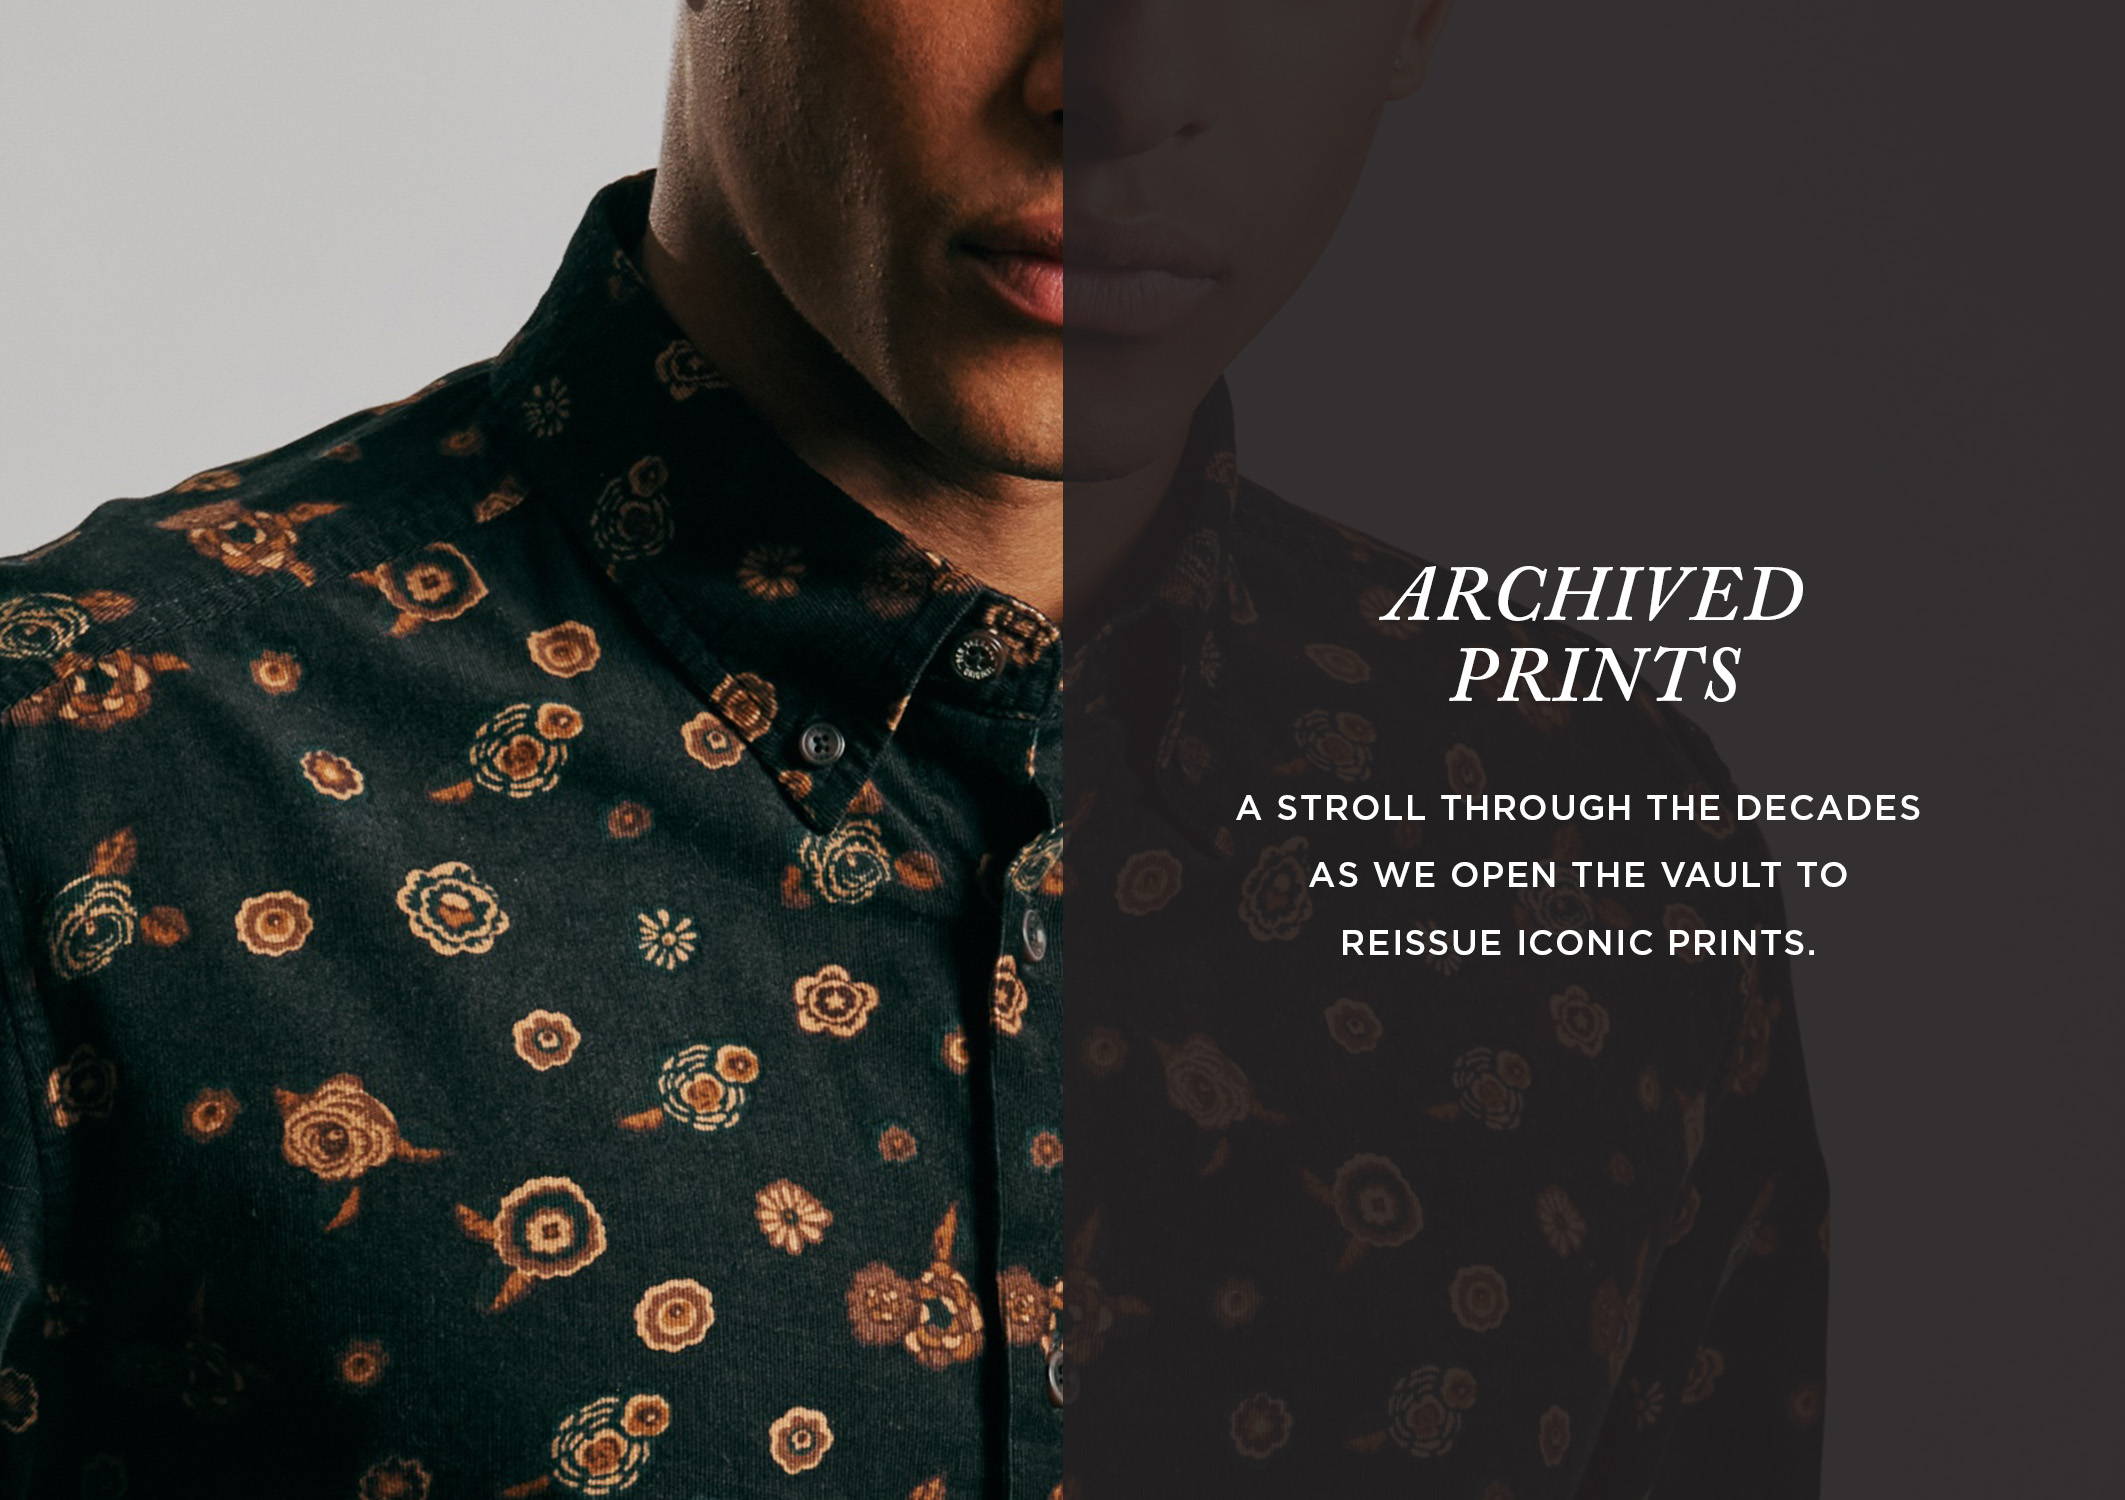 A stroll through the decades as we open the vault to reissue iconic prints.